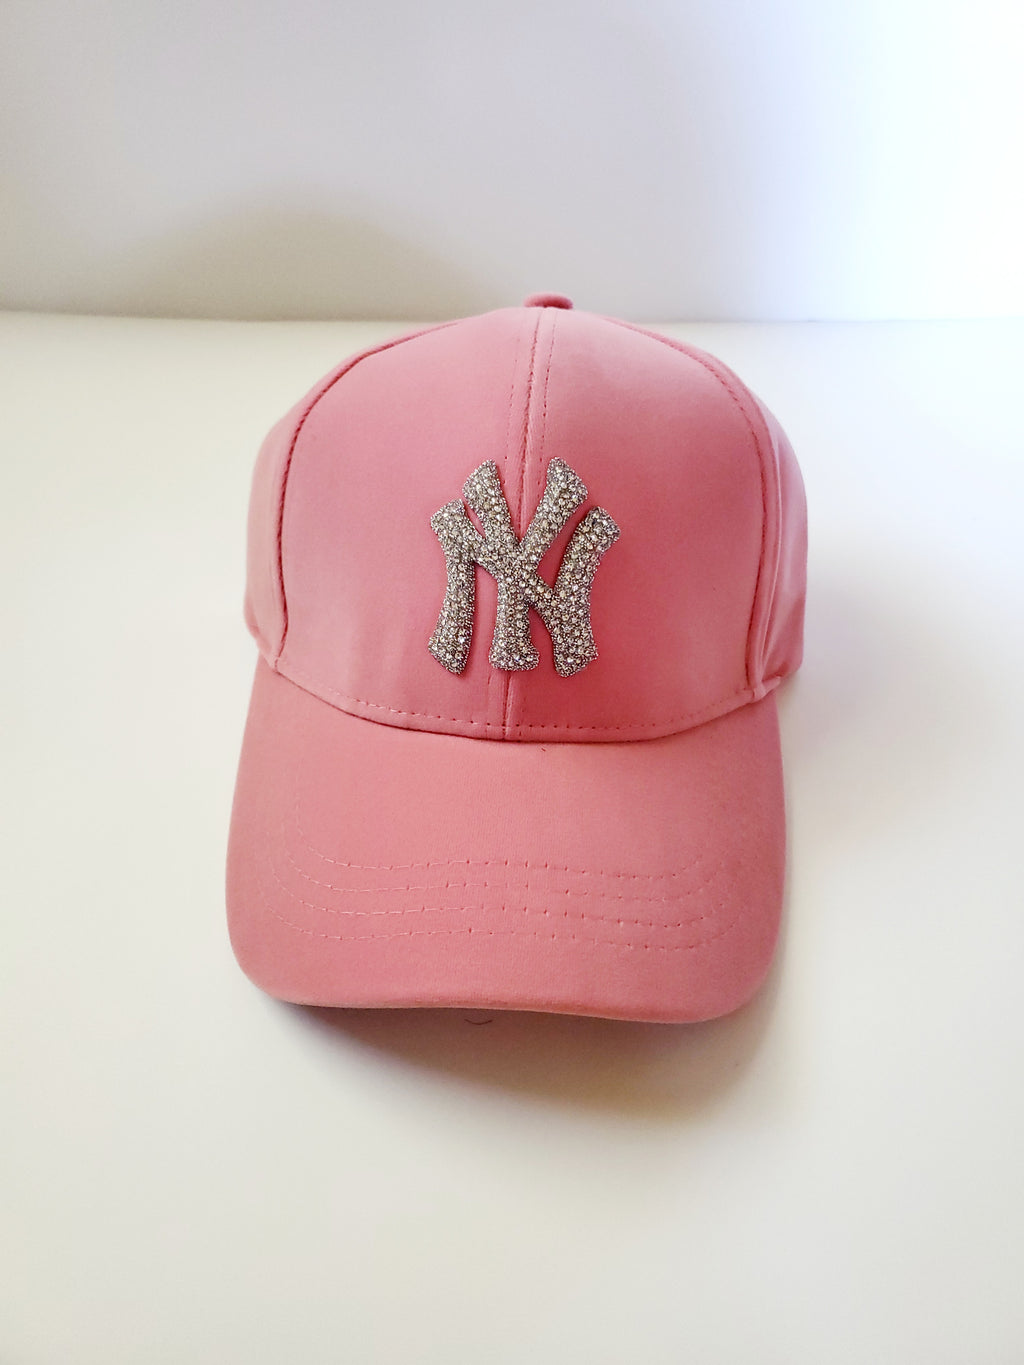 Ny bedazzled yankees hat. adjustable.  4 colors